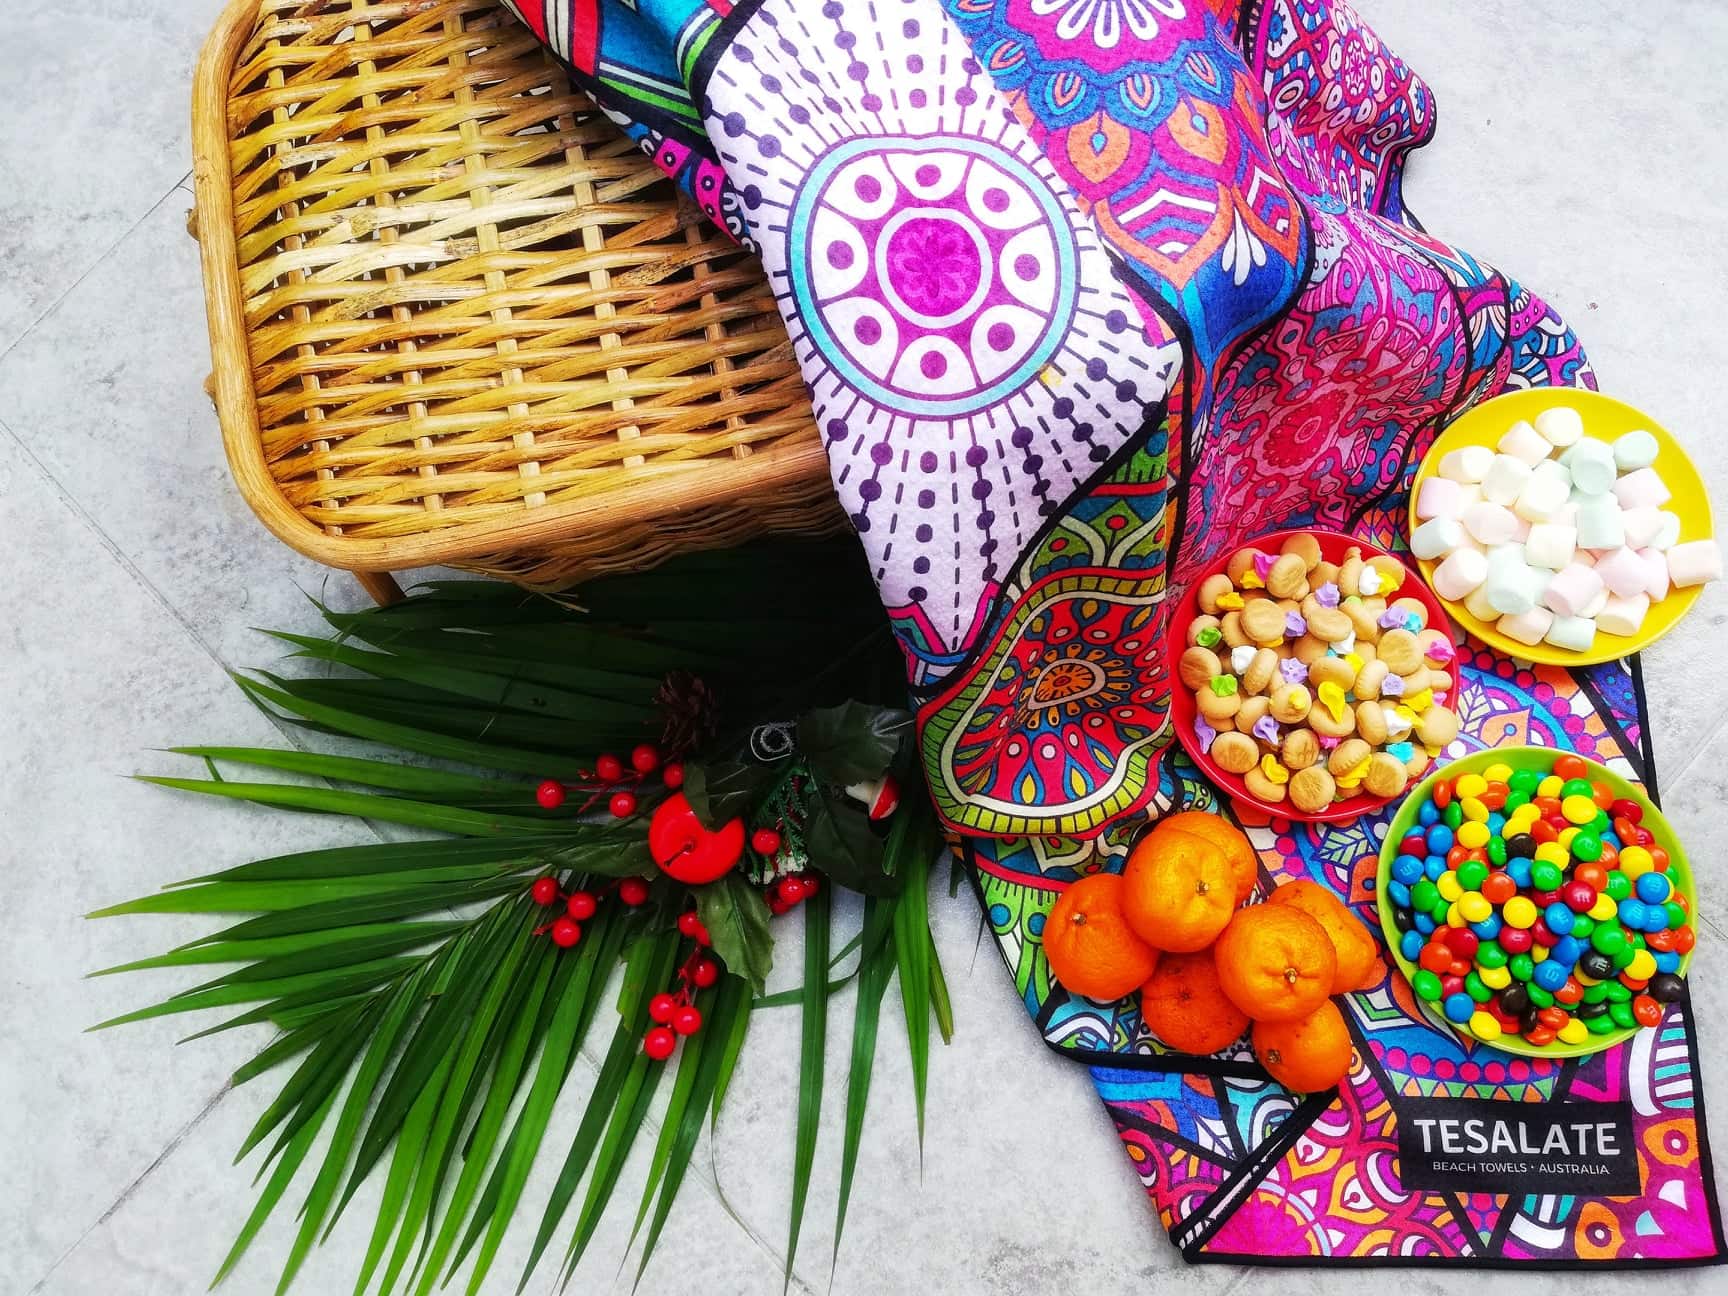 Our Tesalate Beach Towel + Giveaway